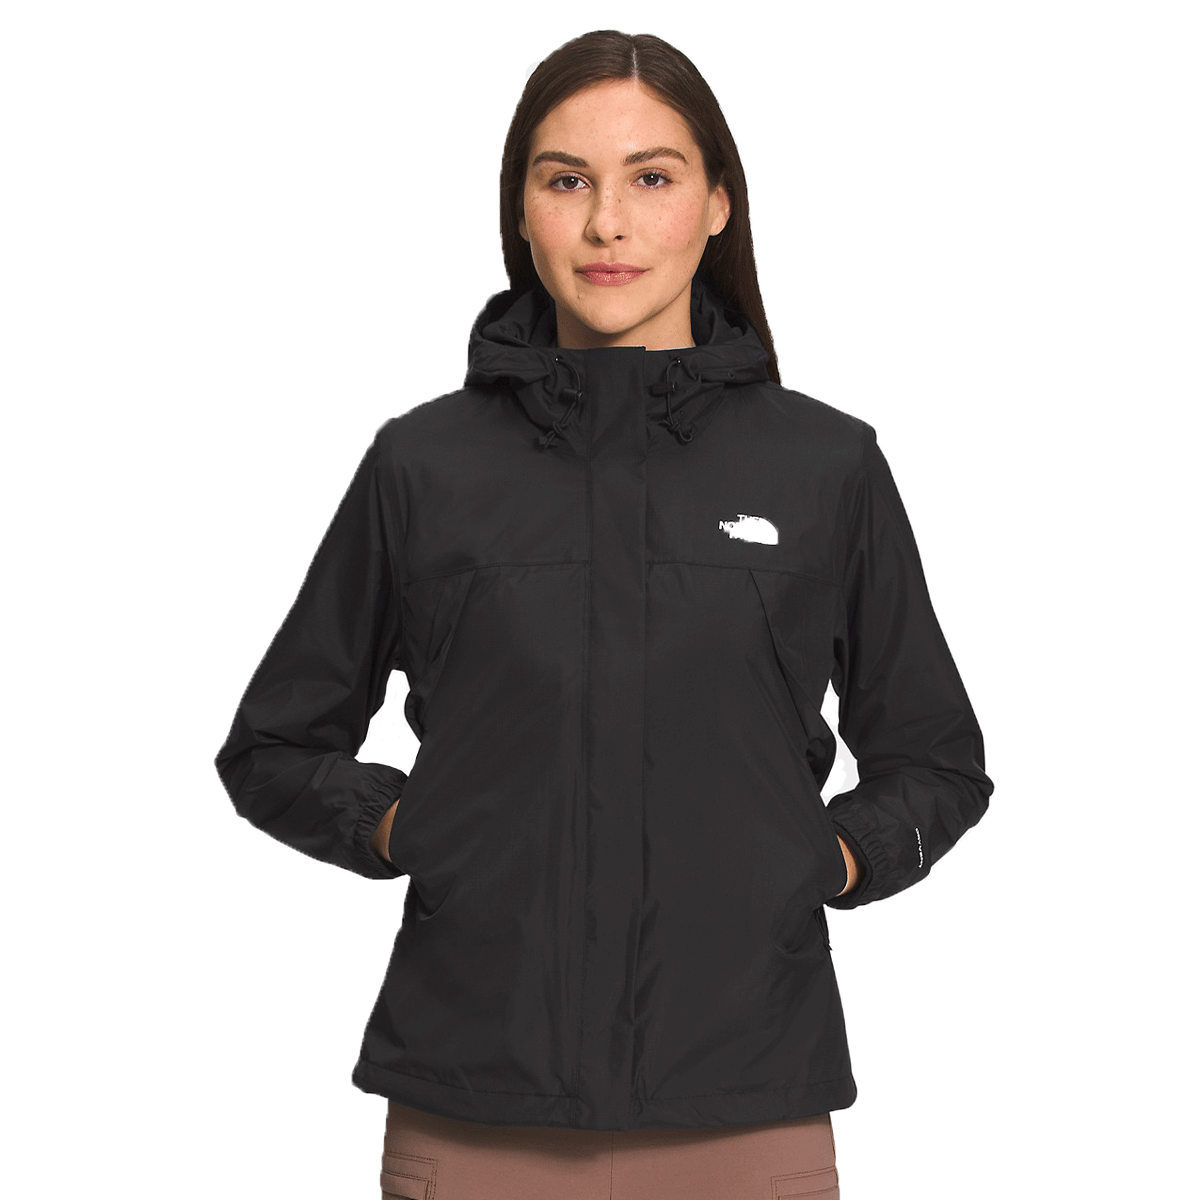 The Face Women's TNF Black Antora Triclimate